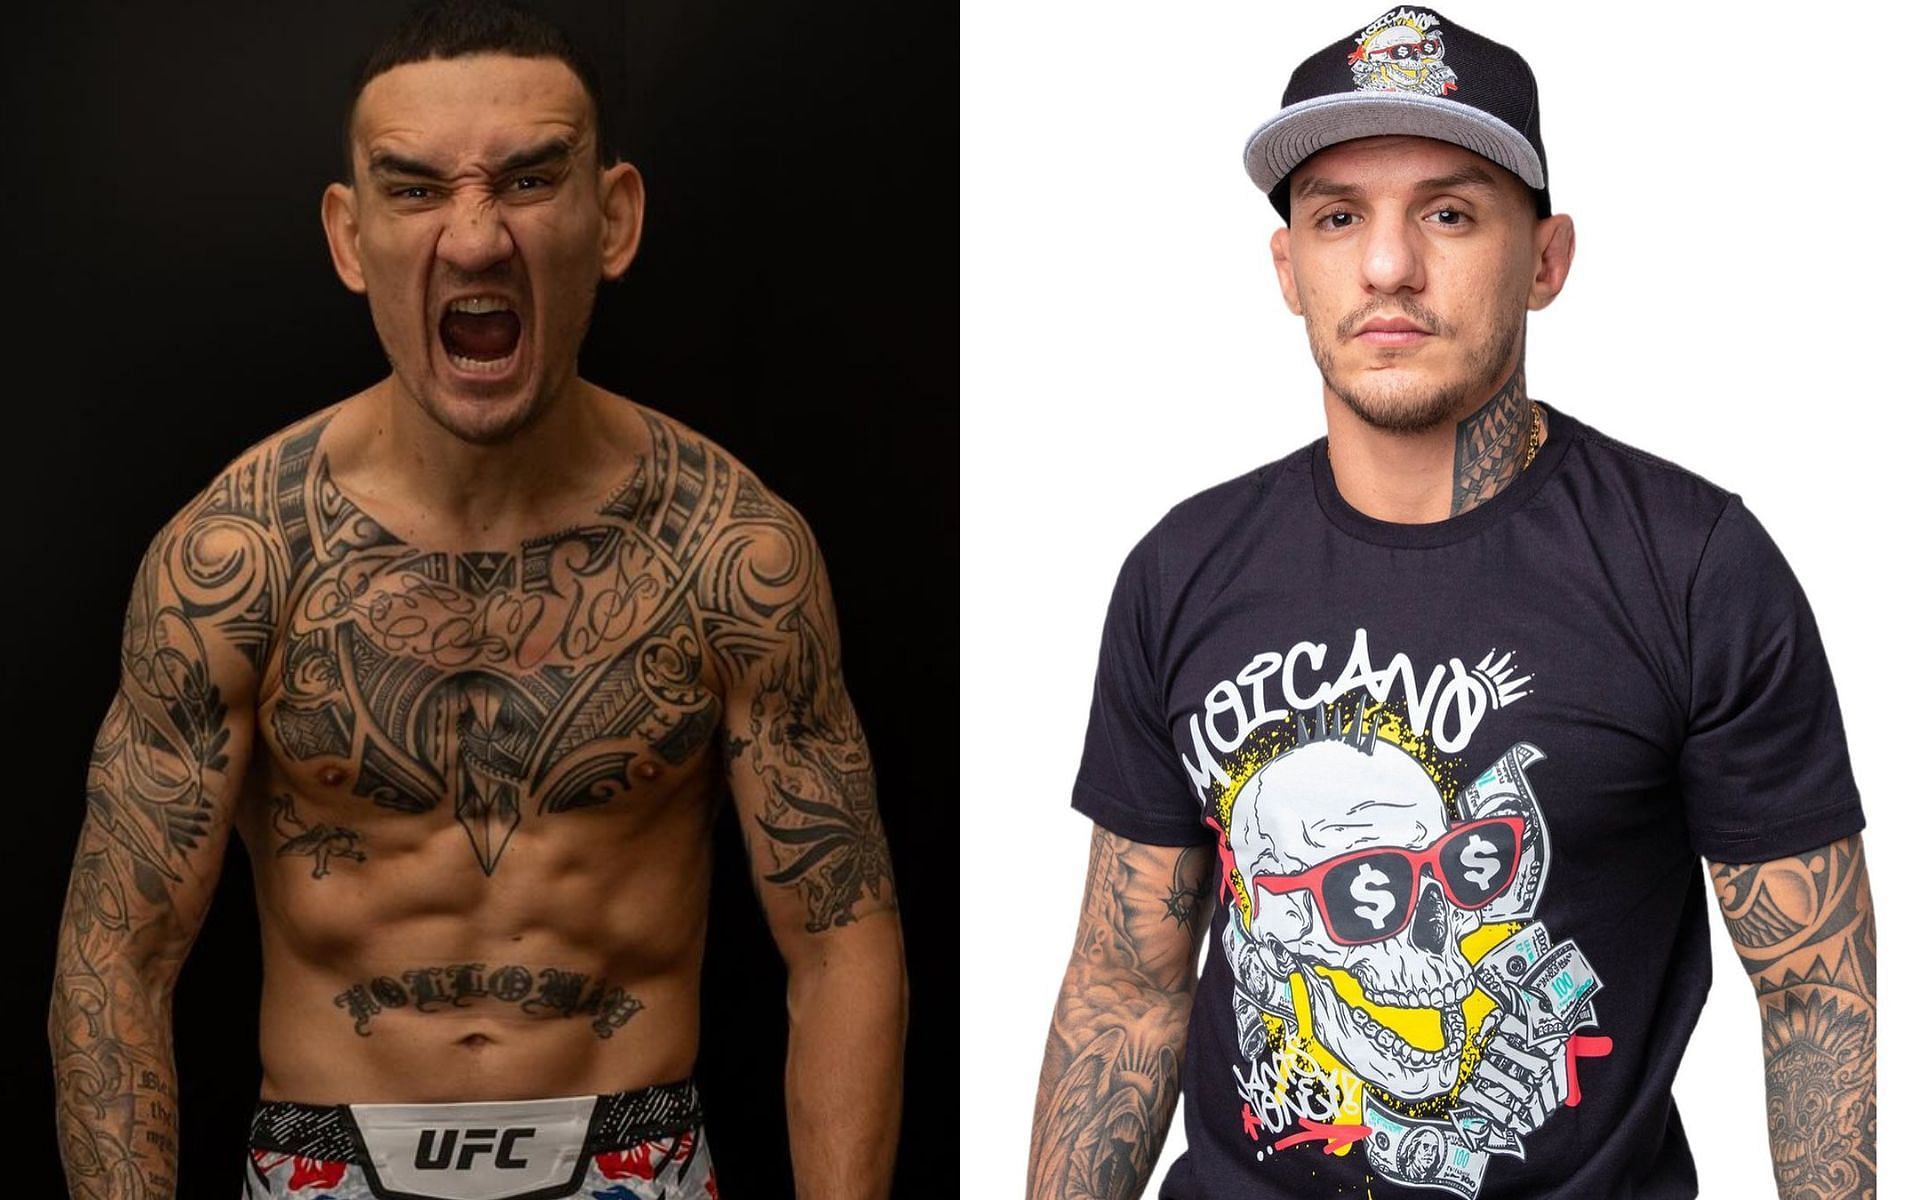 Max Holloway (left) deemed too great a challenge by Renato Moicano (right) [Images courtesy of @blessedmma and @renato_moicano_ufc on Instagram]